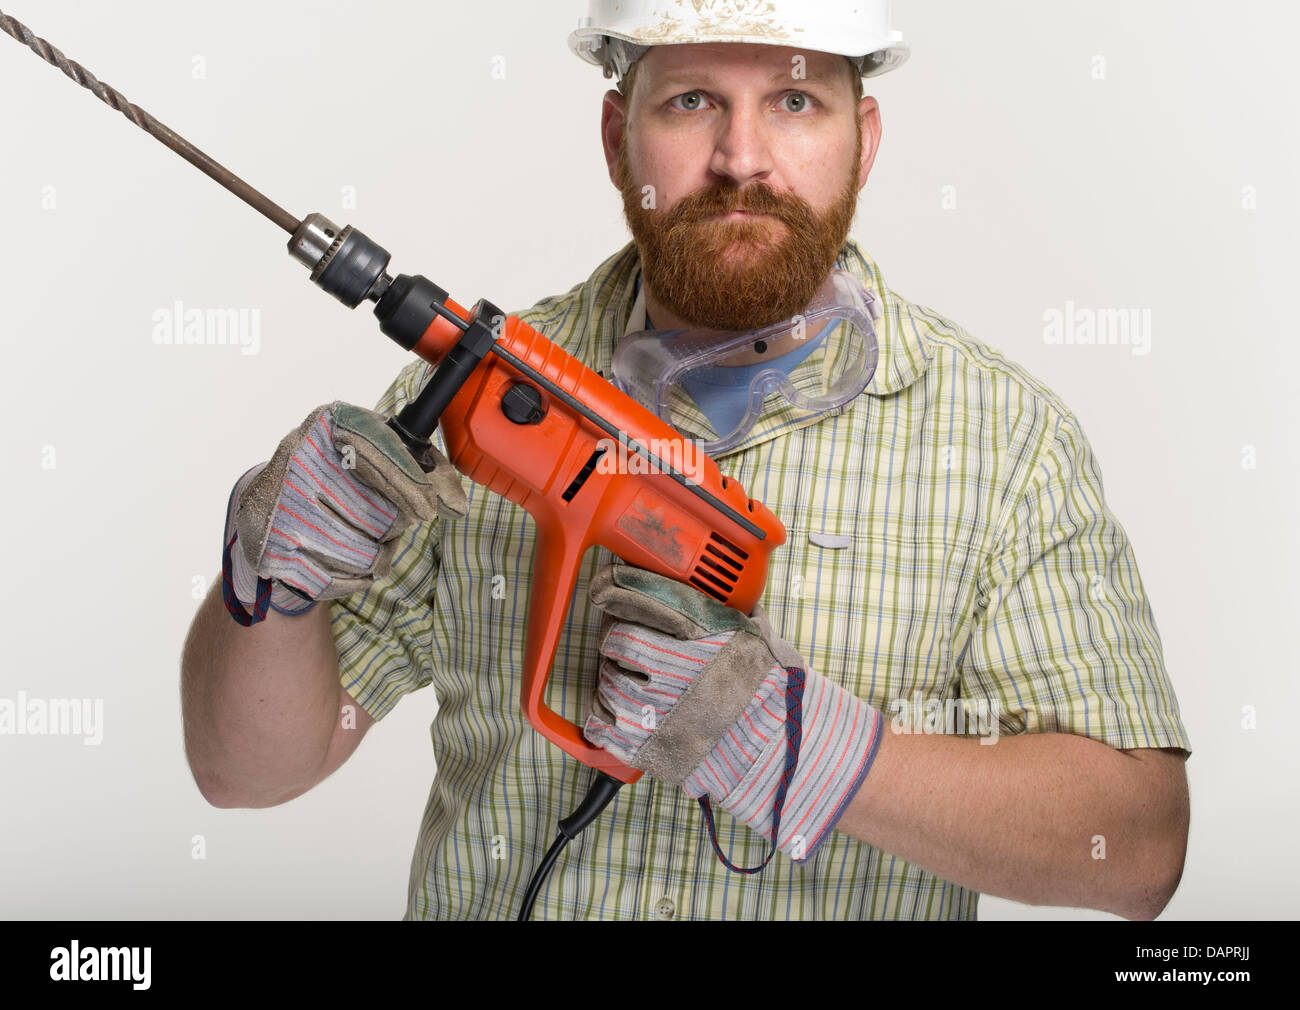 Workman with electric power  impact drill and larger concrete drill bit. Stock Photo